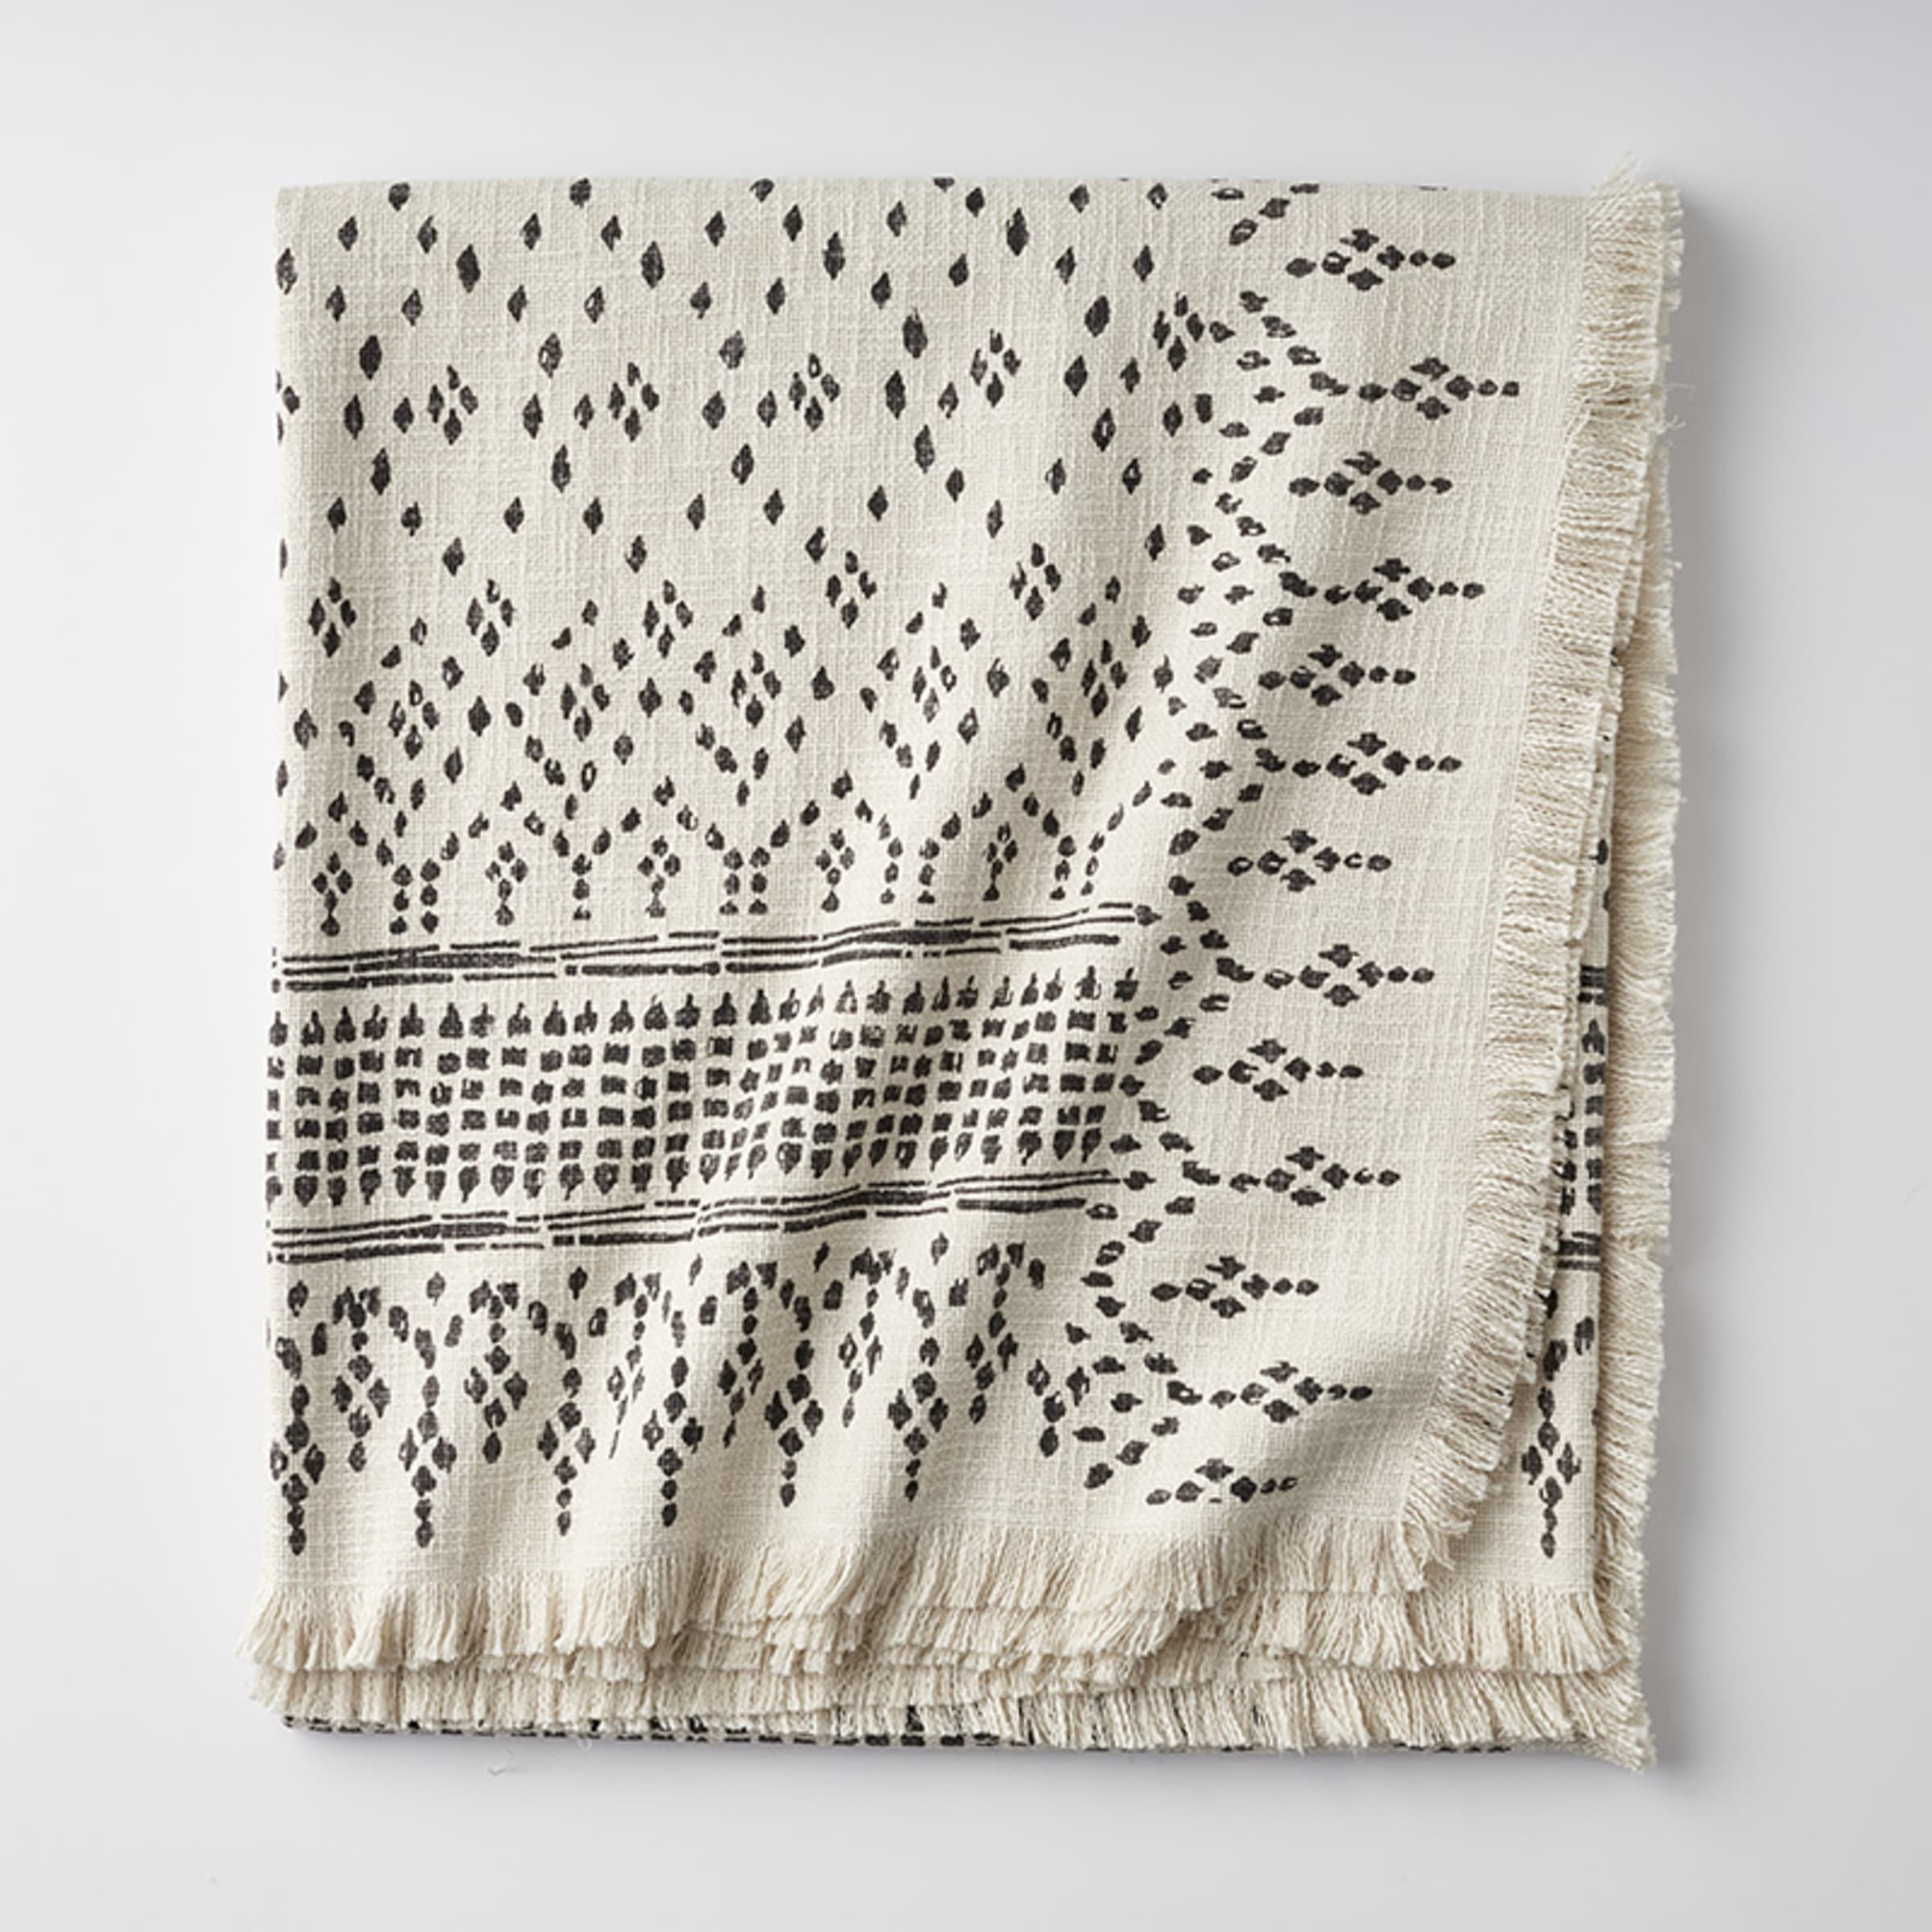 OP Dot Cotton Blanket | The Company Store